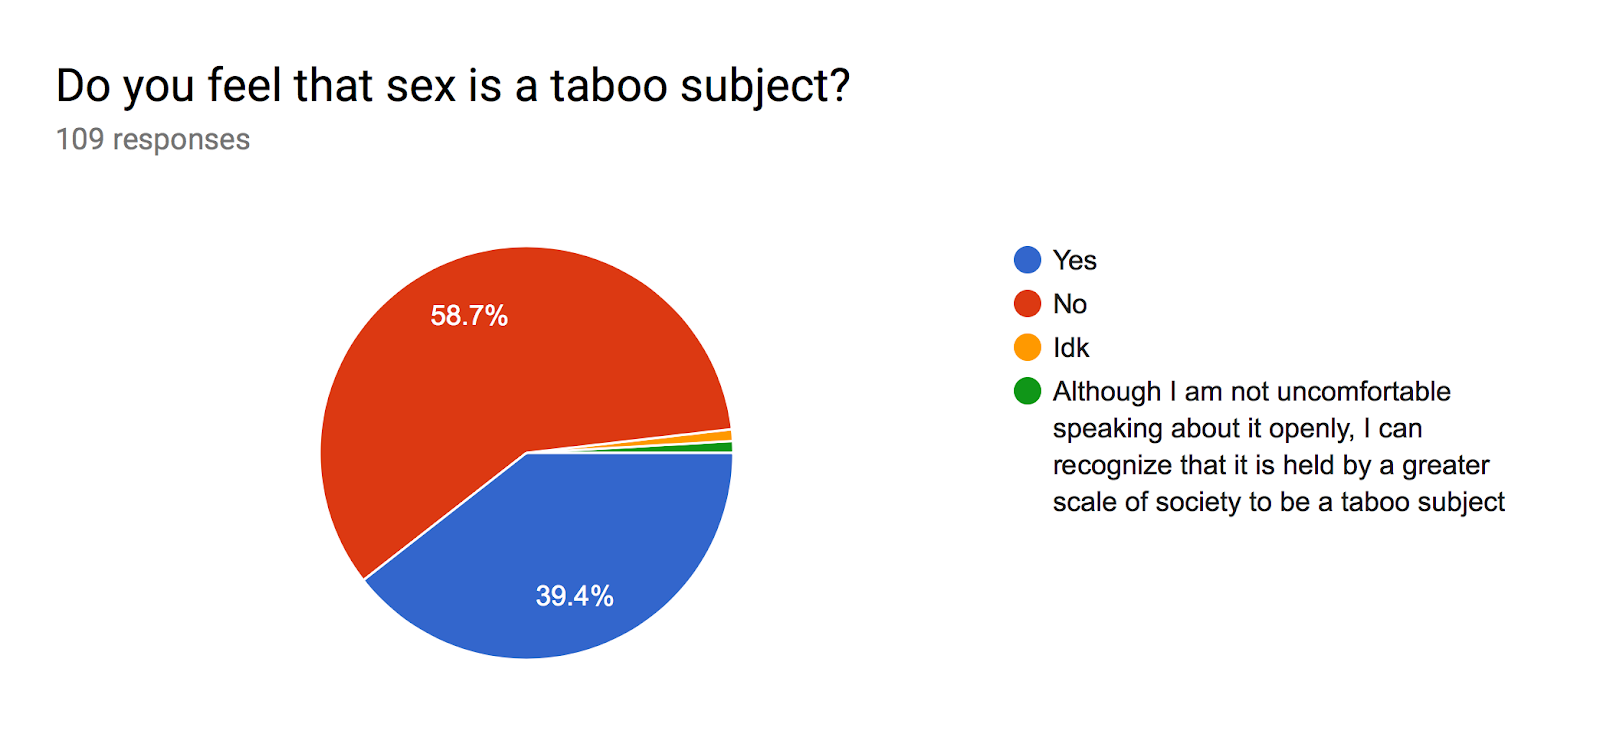 Forms response chart. Question title: Do you feel that sex is a taboo subject? . Number of responses: 109 responses.